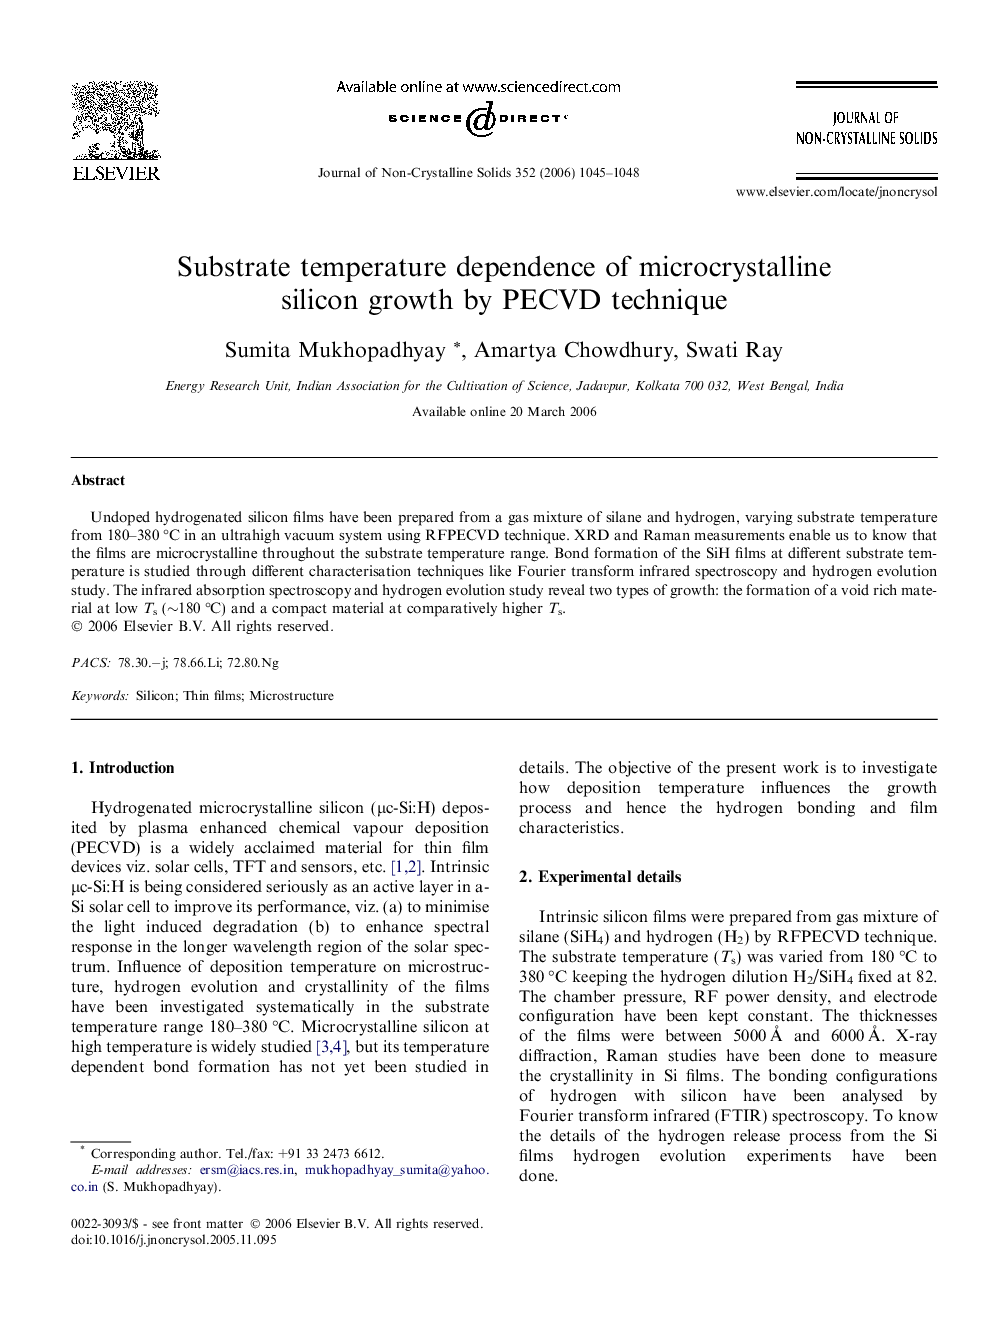 Substrate temperature dependence of microcrystalline silicon growth by PECVD technique